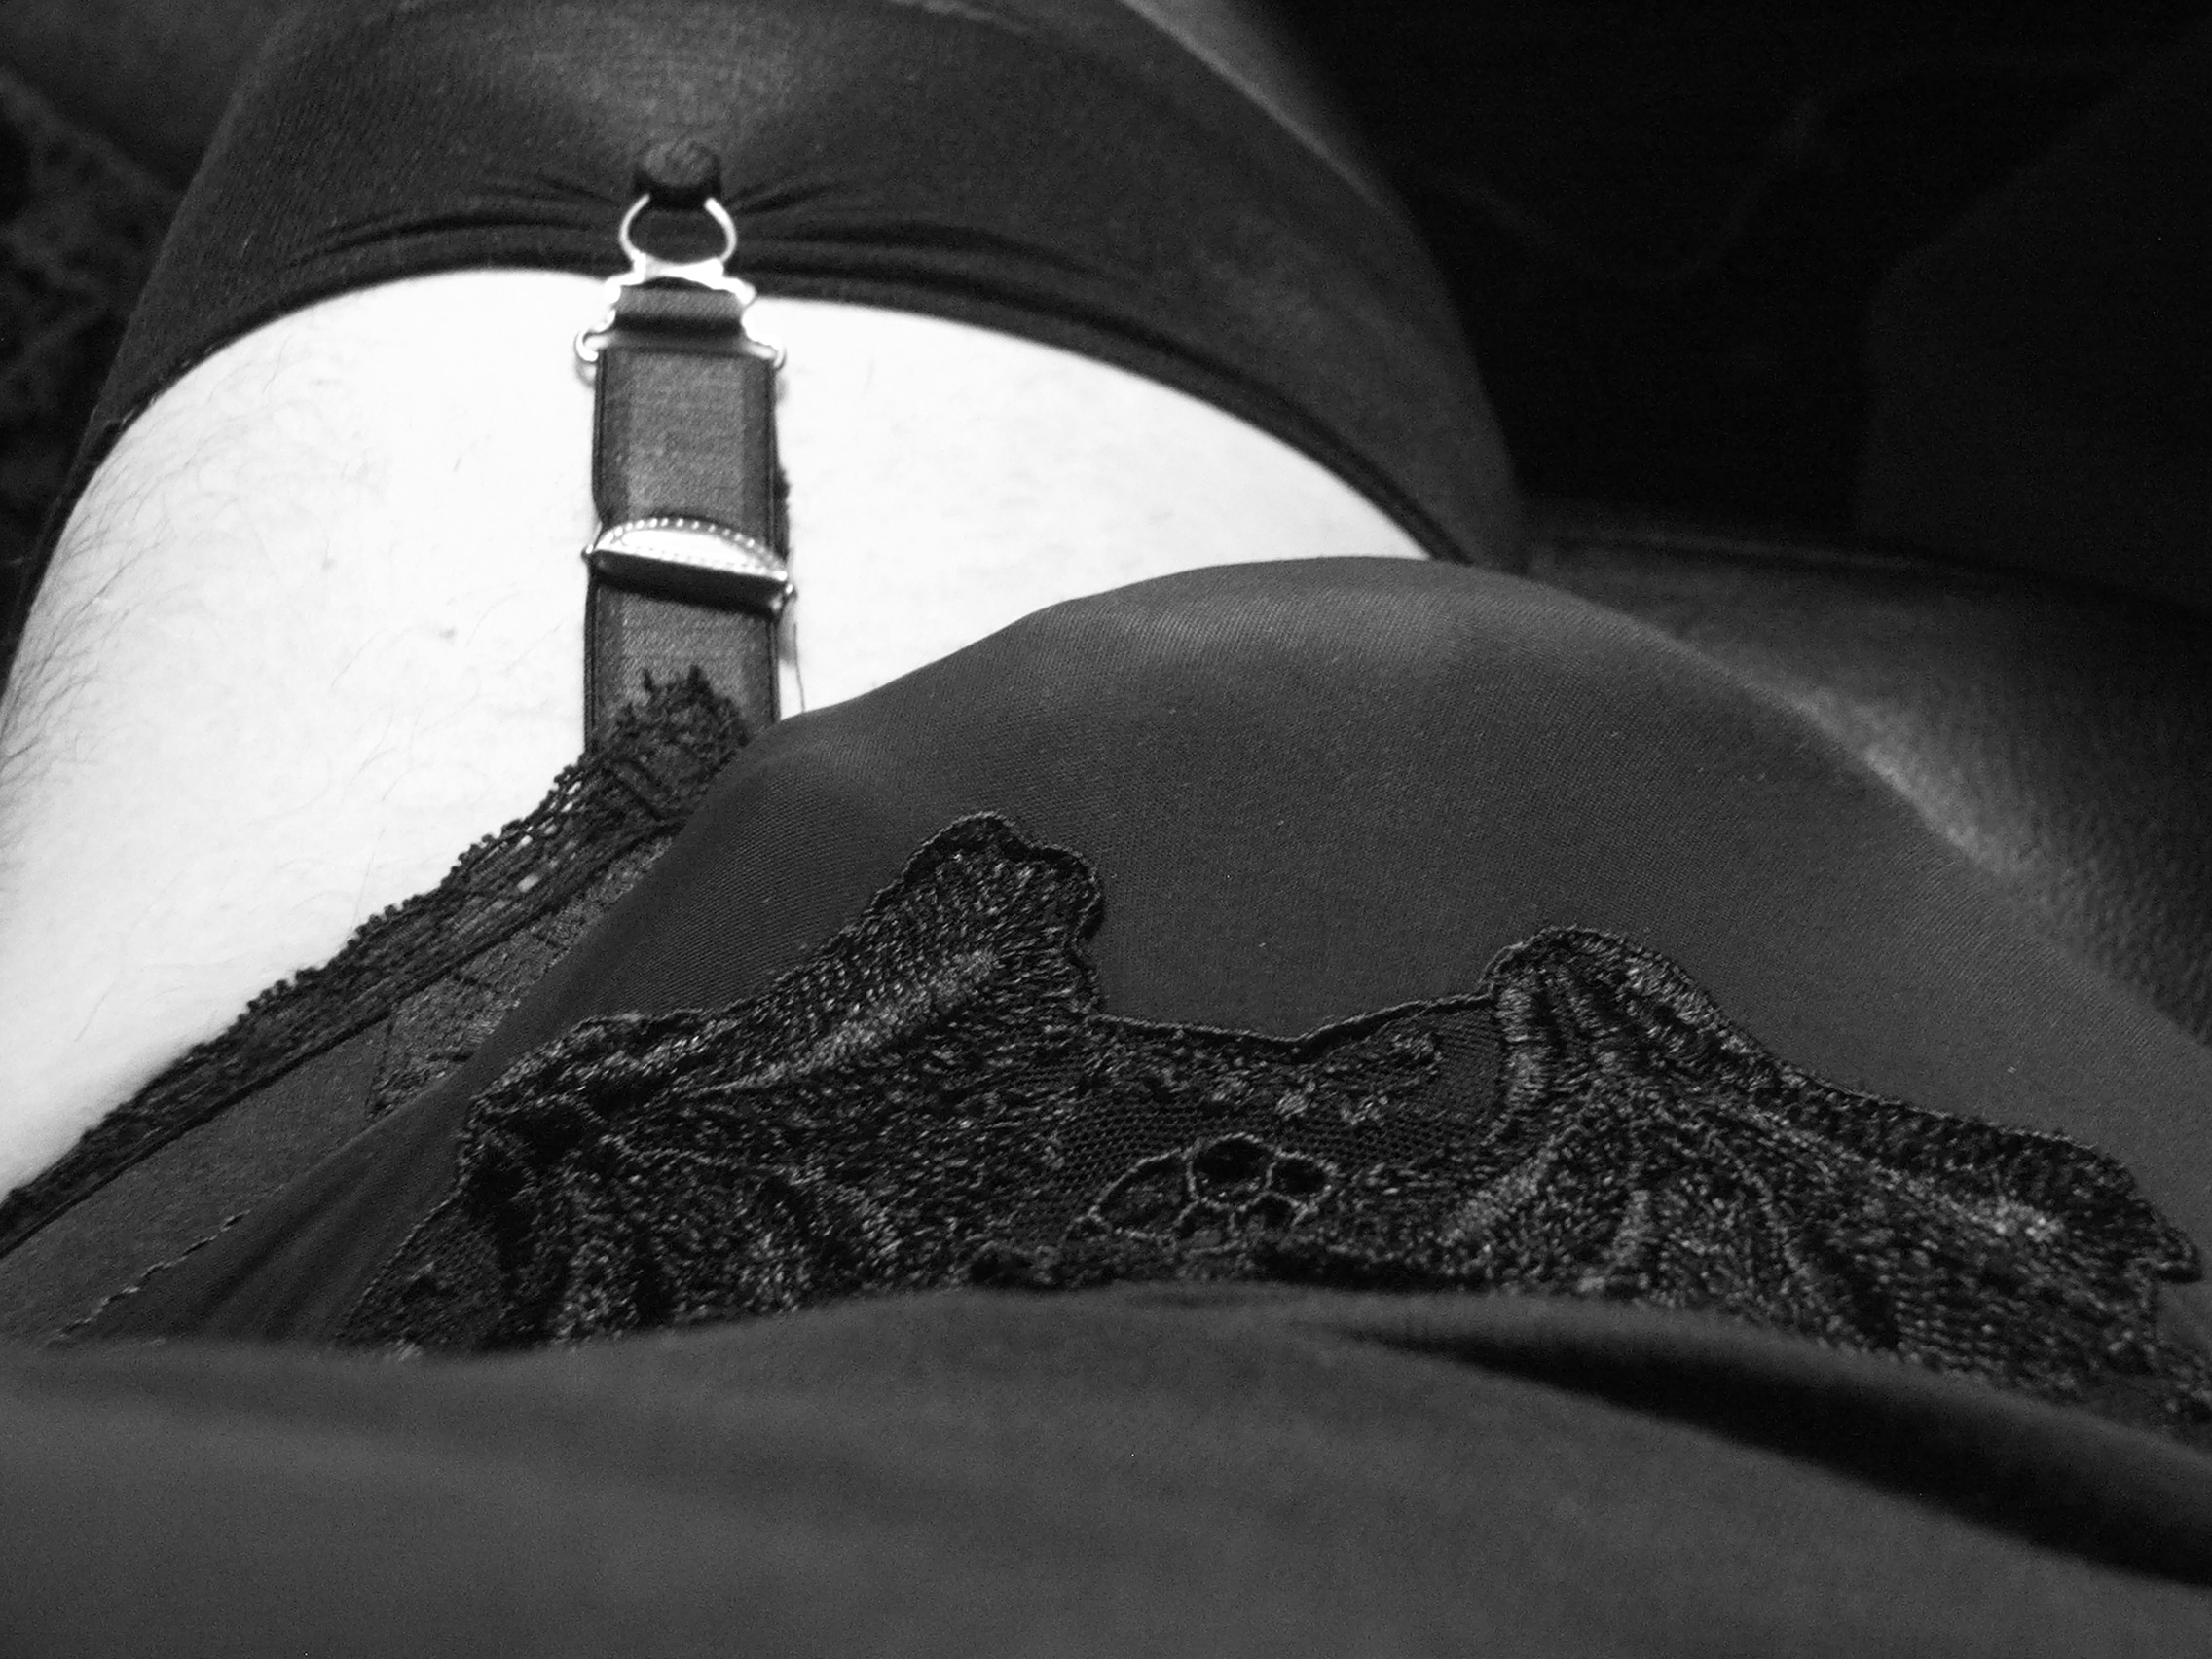 Black And White Xxx - Black and white in lingerie - Huge cock On Yuvutu Homemade ...